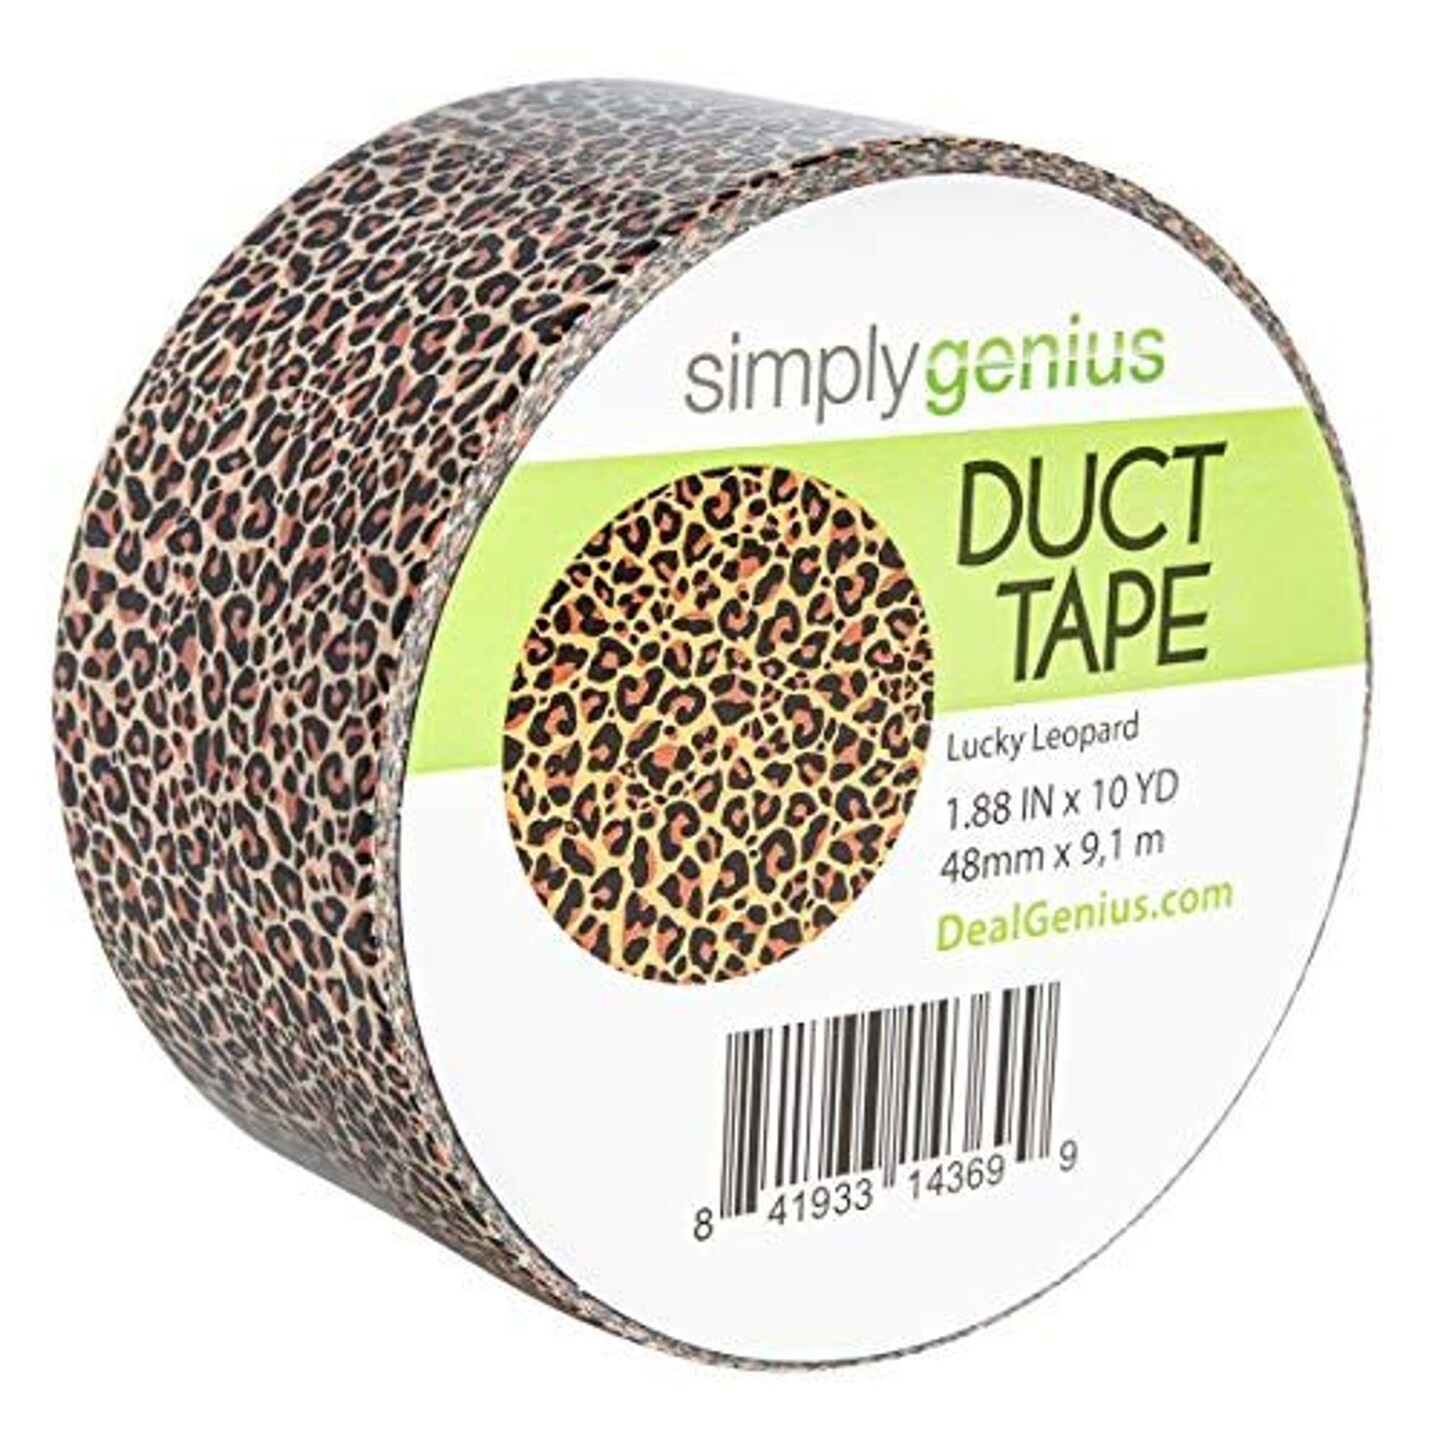 Simply Genius Pattern Duct Tape Heavy Duty - Craft Supplies for Kids &#x26; Adults - Colored Duct Tape - Single Roll 1.8 in x 10 yards - Colorful Tape for DIY, Craft &#x26; Home Improvement (Lucky Leopard)